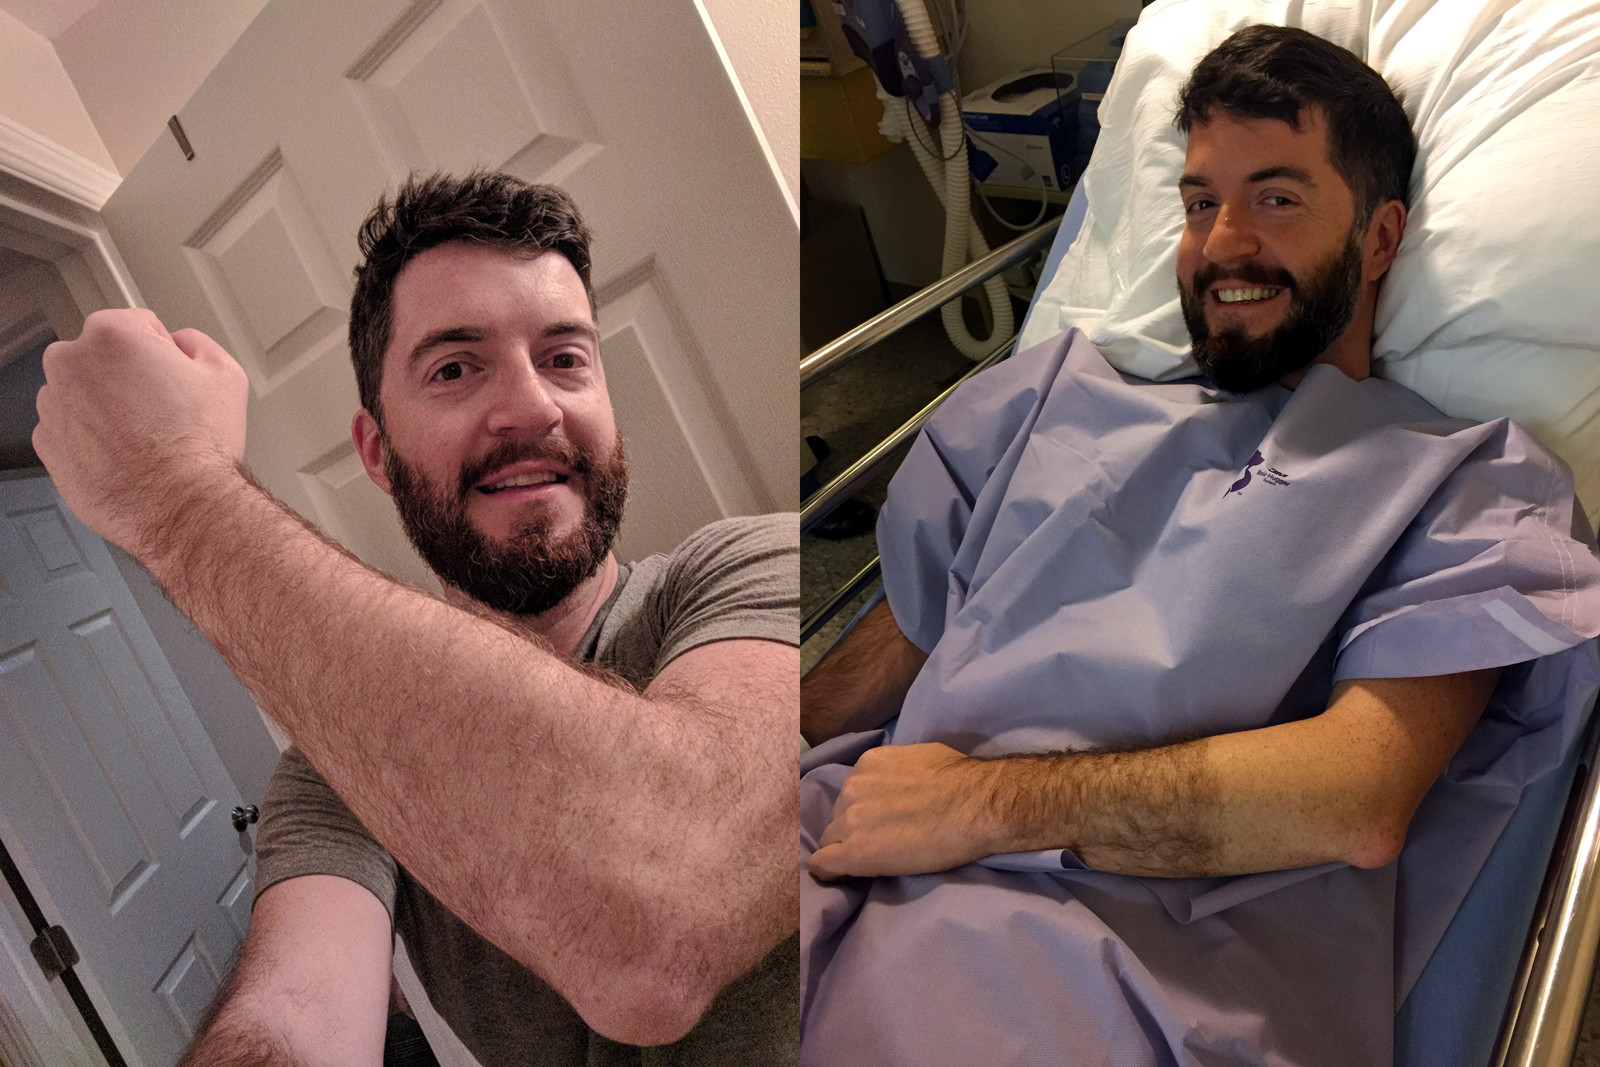 Justin metal elbow selfie and shaved arm before surgery